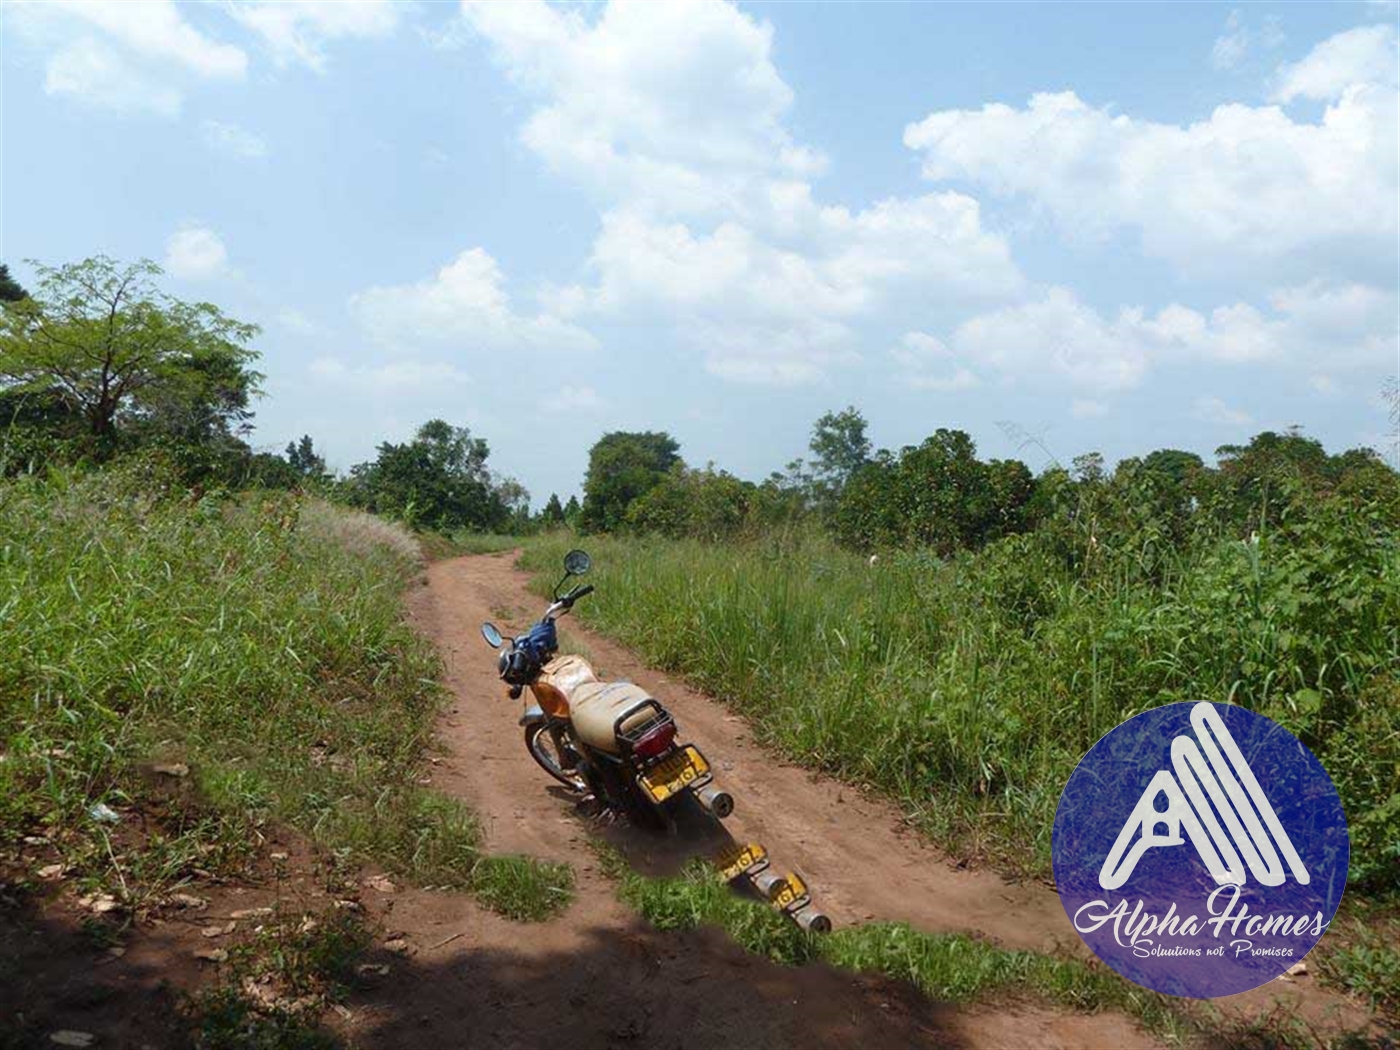 Agricultural Land for sale in Gayaza Kampala